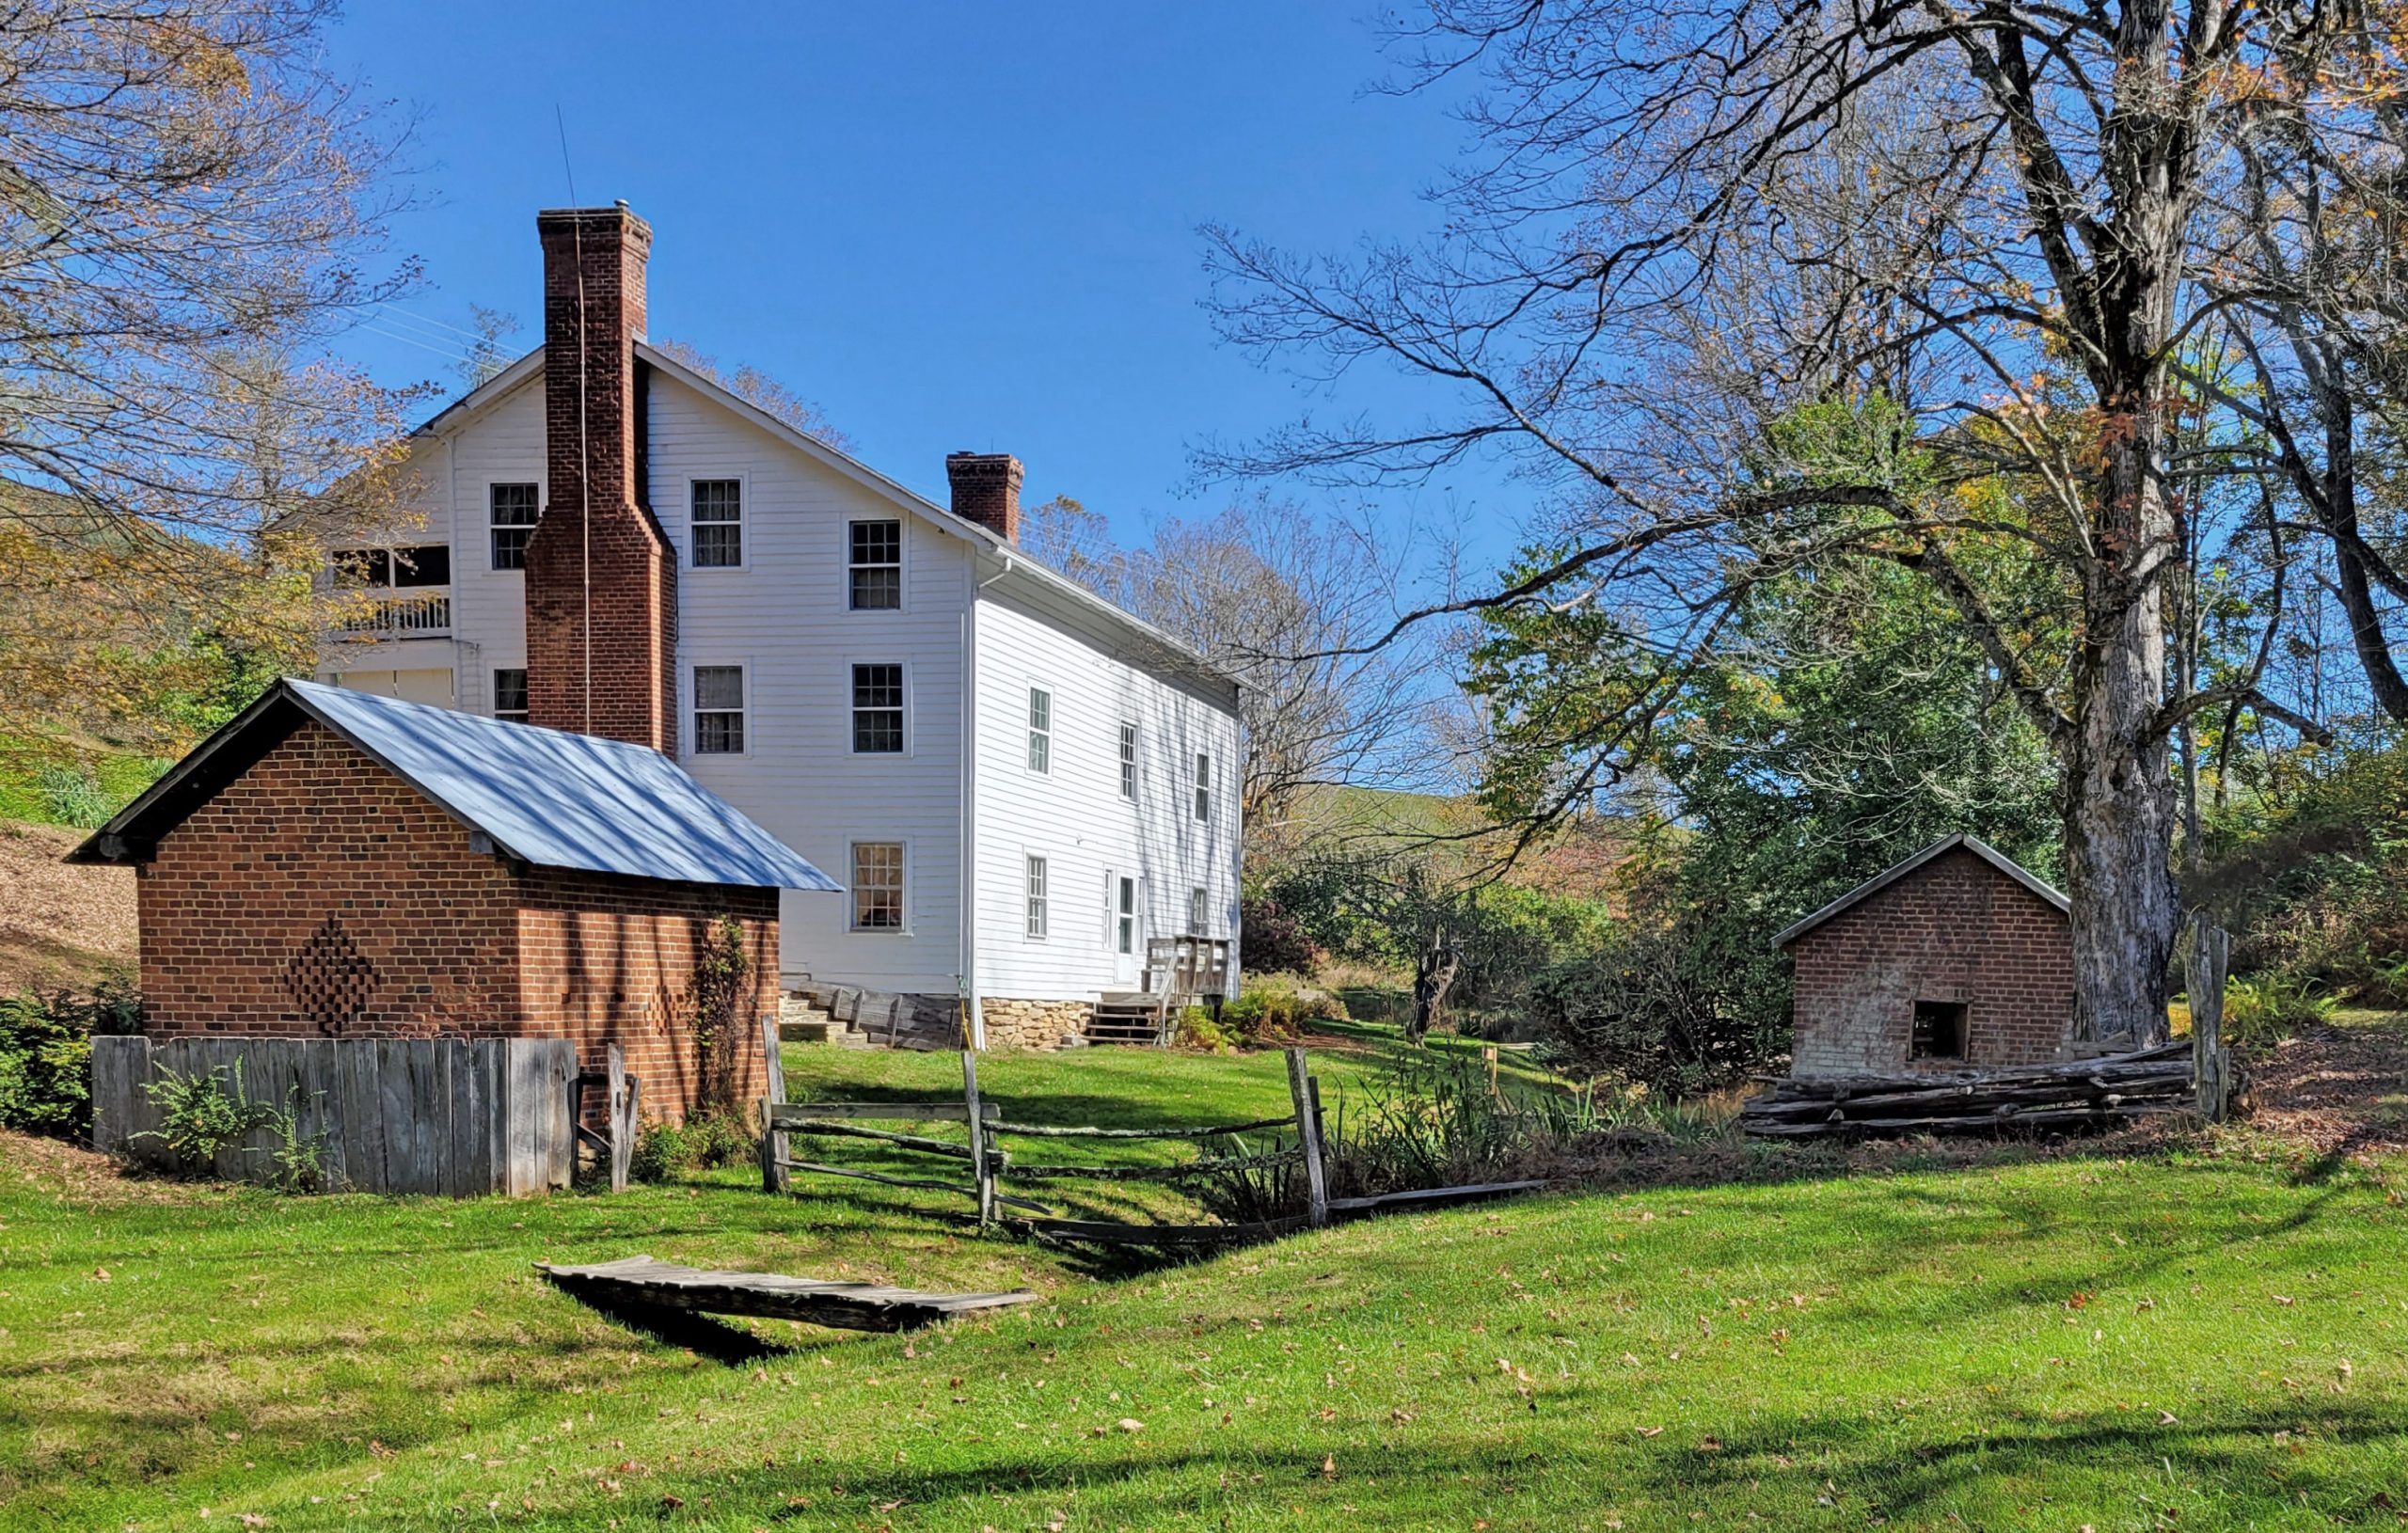 Main House and Outbuildings. Photo credit: Mike Pulice/DHR, 2021